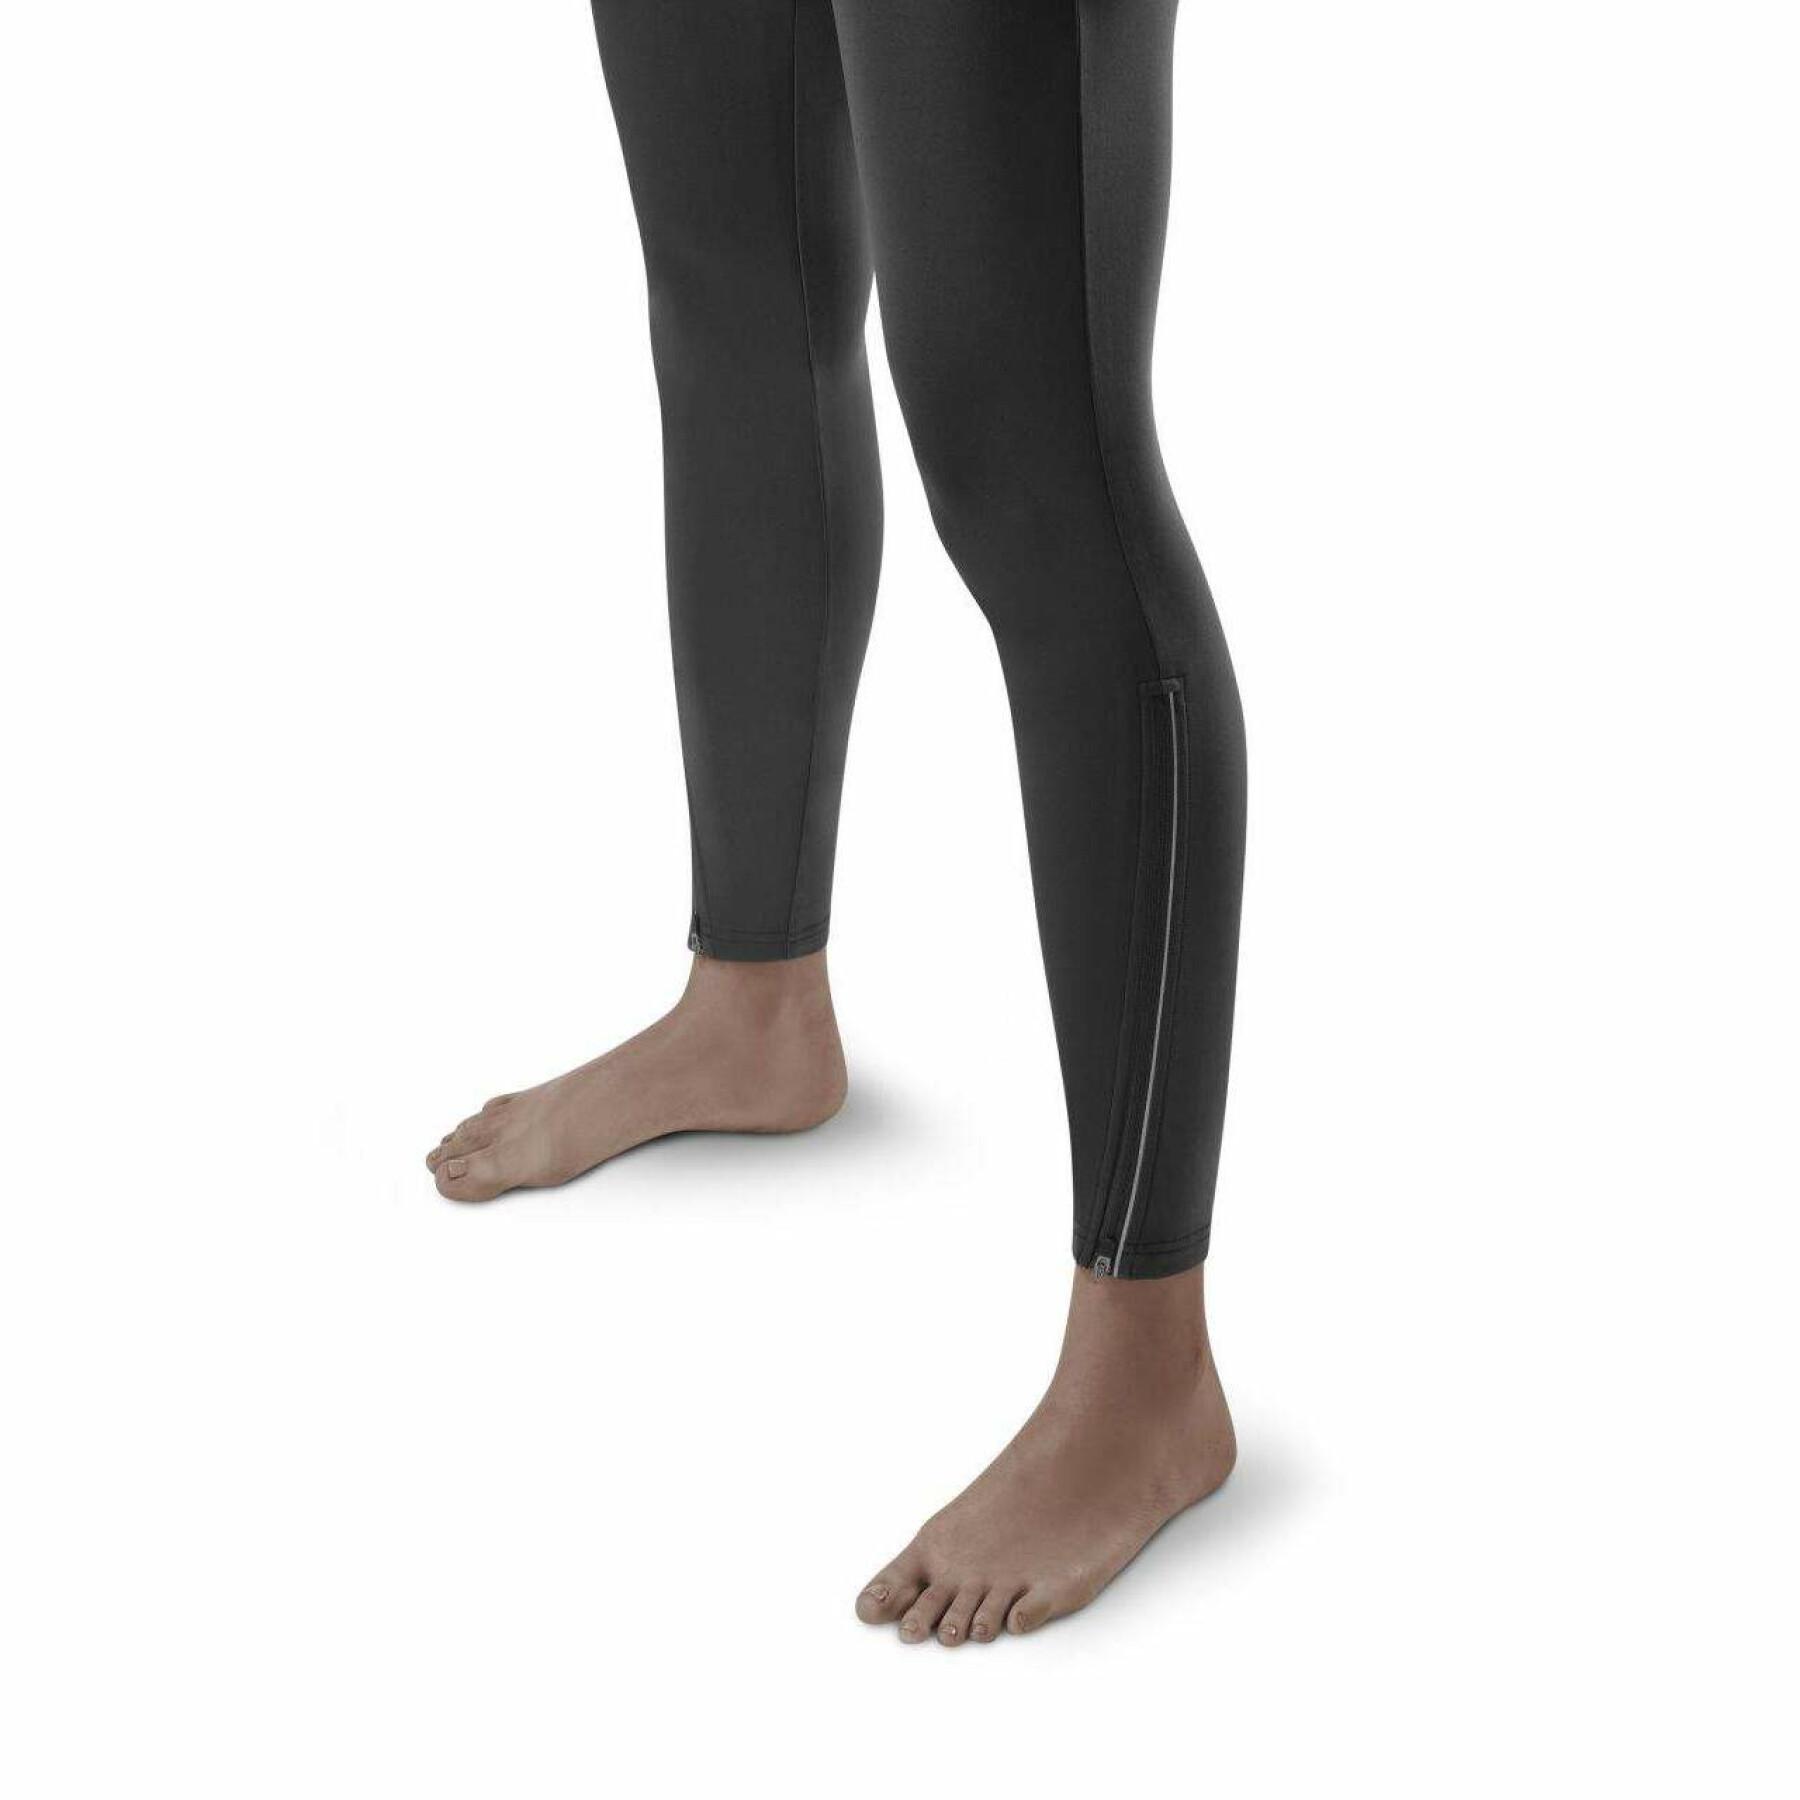 Legging woman CEP Compression winter - Clothing running - Running -  Physical maintenance